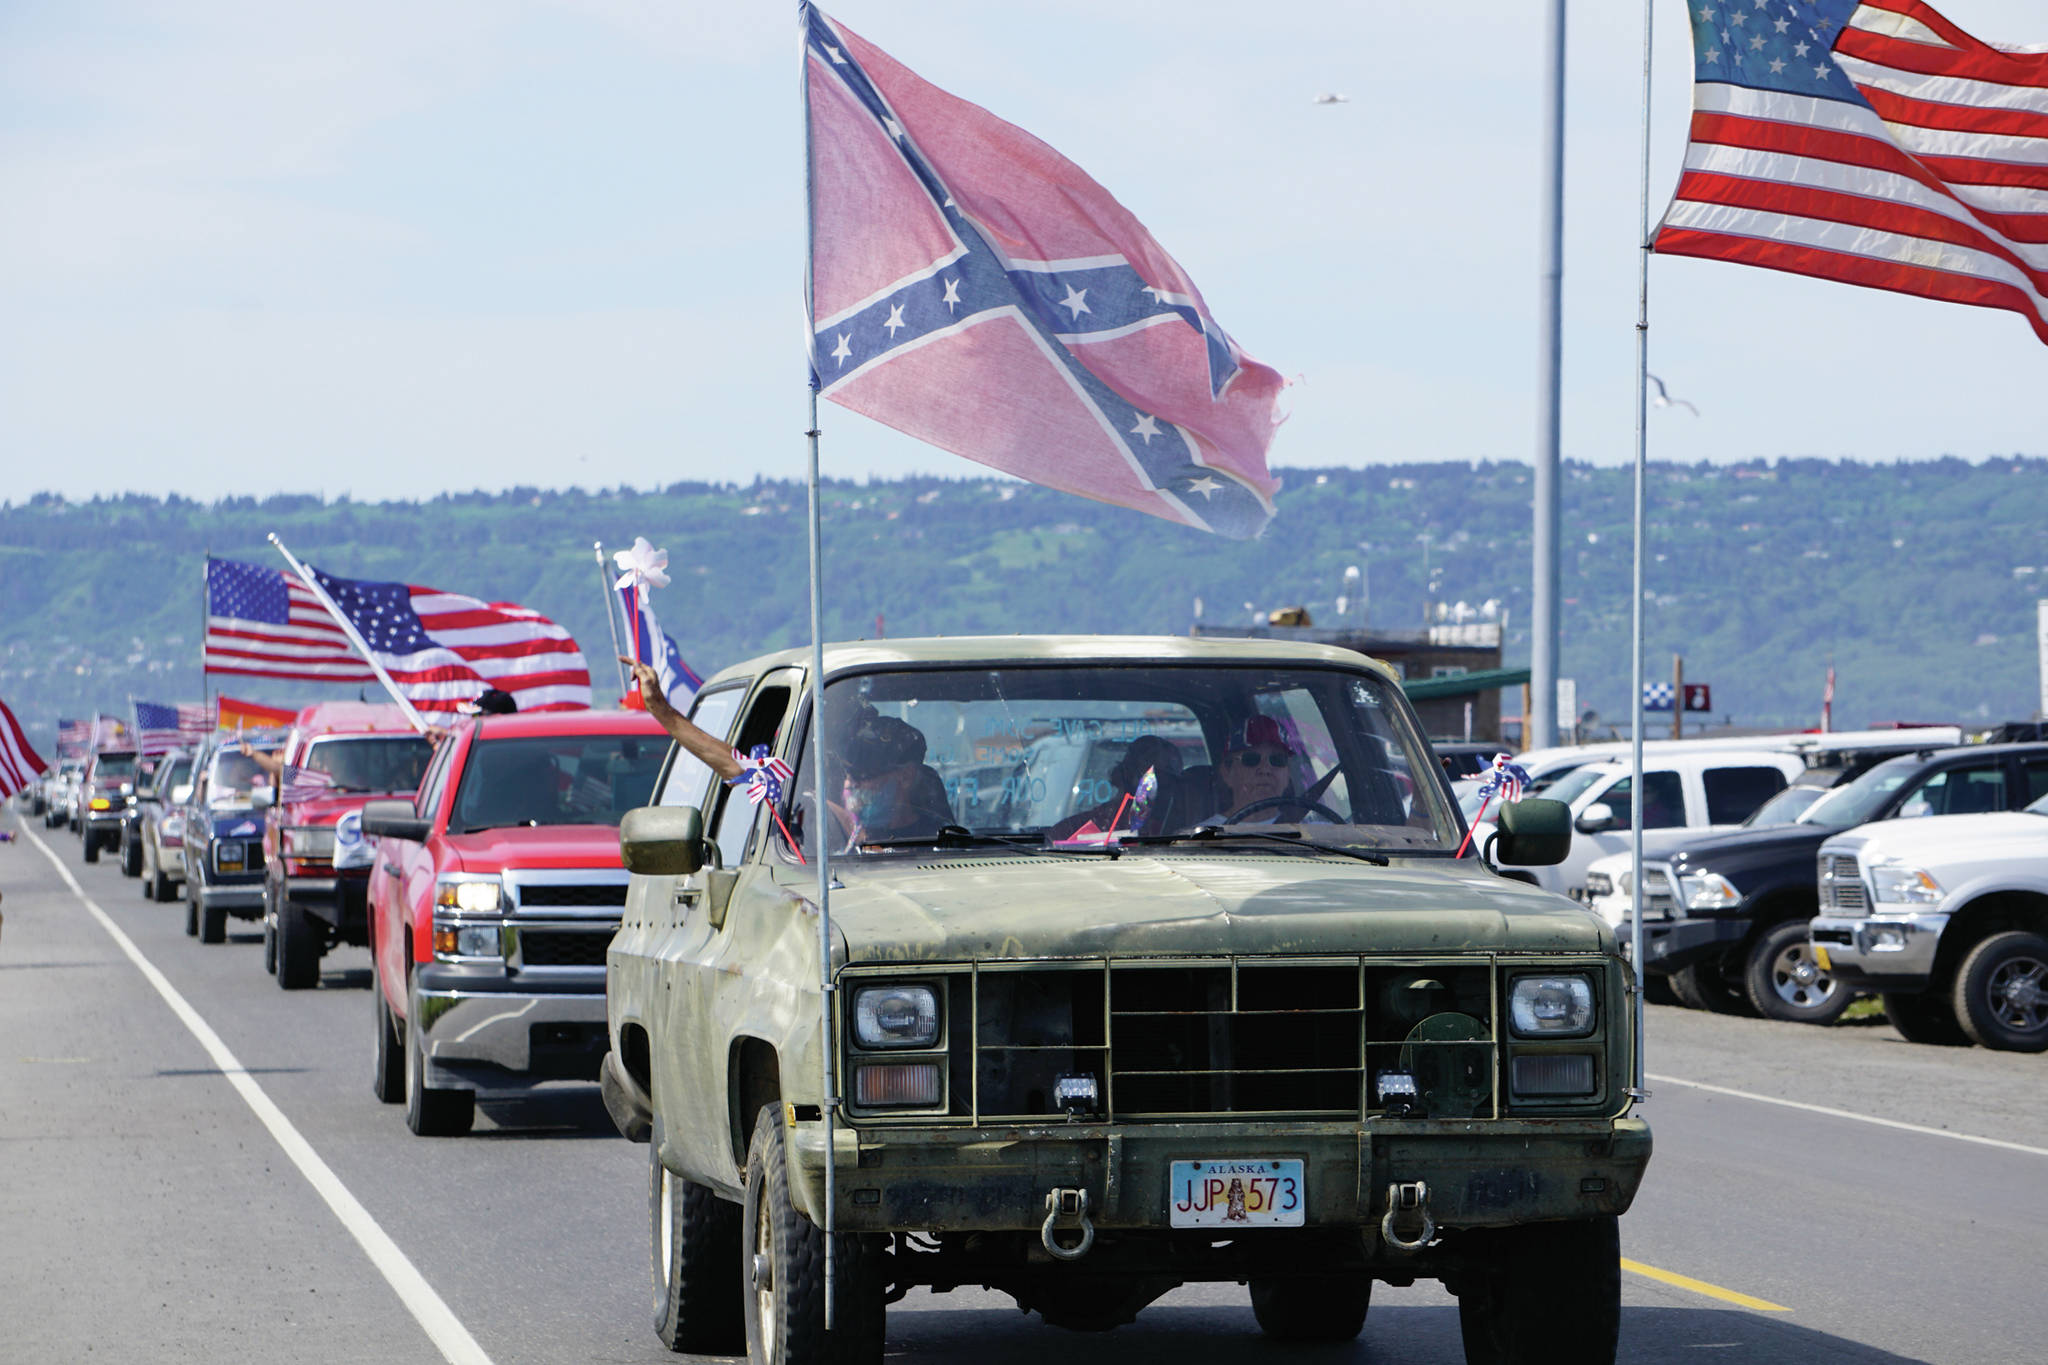 An unidentified man wearing a Confederate cap and flying a Confederate flag from his car participates in a July 4, 2020 parade that went from Soundview Avenue on the Sterling Highway to the end of the Homer Spit in Homer, Alaska. Some people view the flag as an expression of Southern heritage, while others see it as a symbol representing racism, white supremacy and the Civil War secessionists who fought to maintain slavery. (Photo by Michael Armstrong/Homer News)